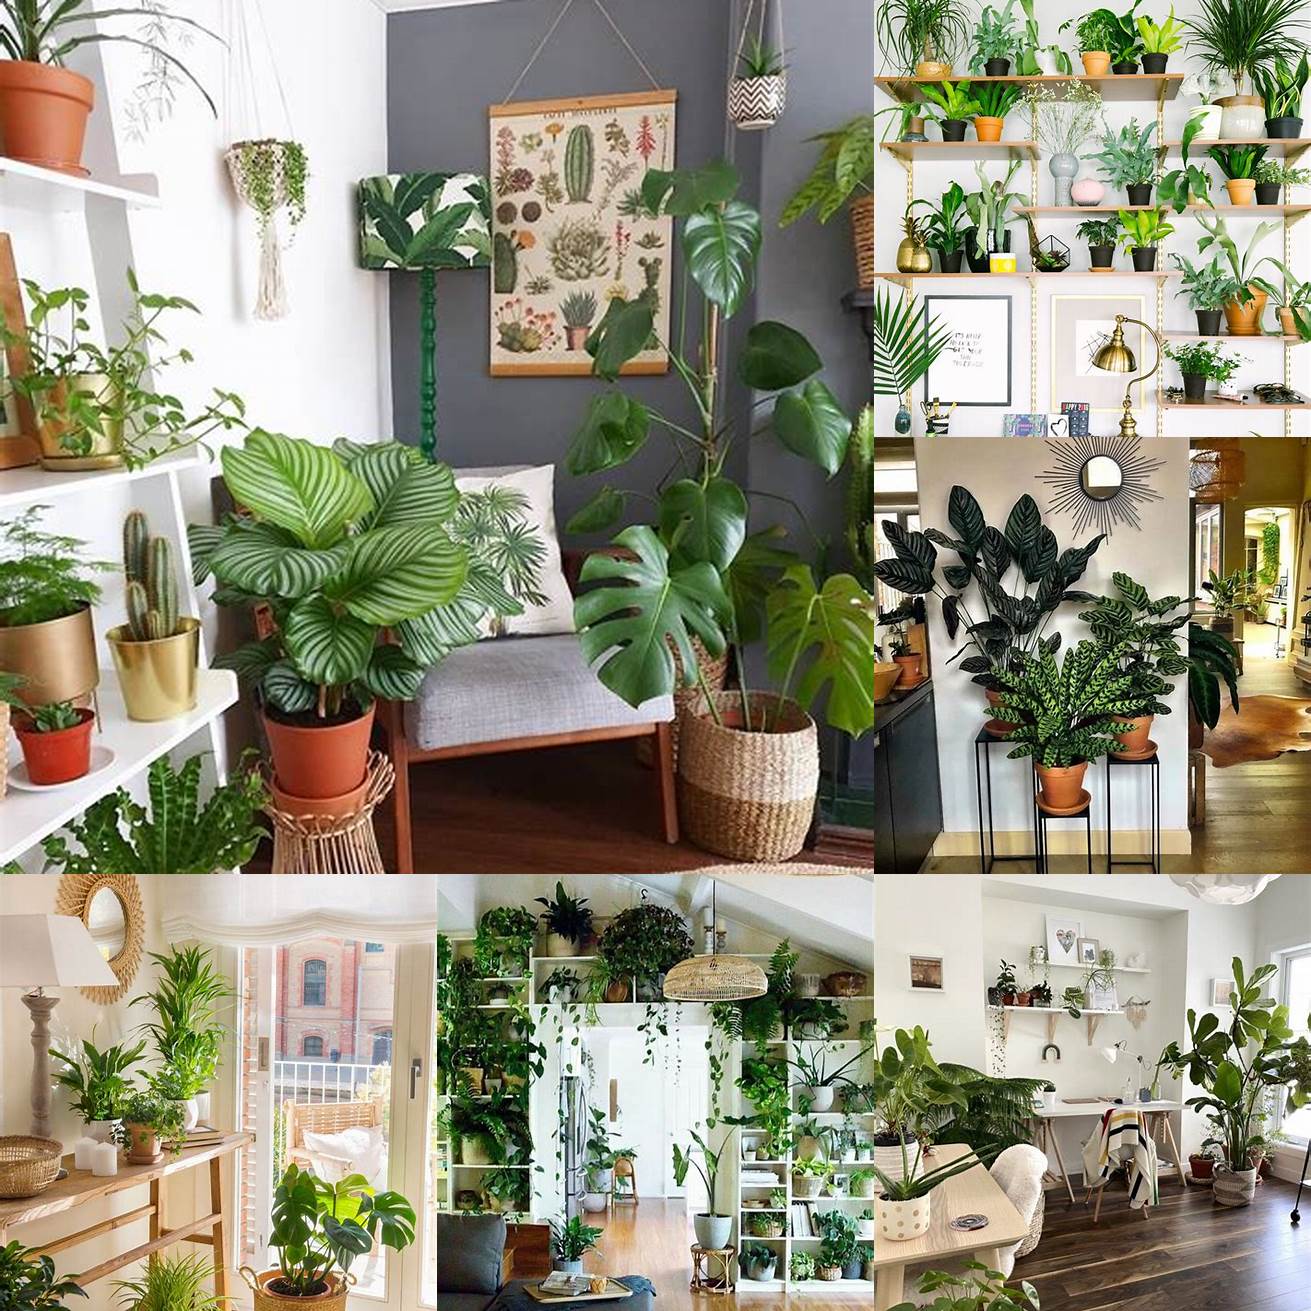 Accessorize with plants